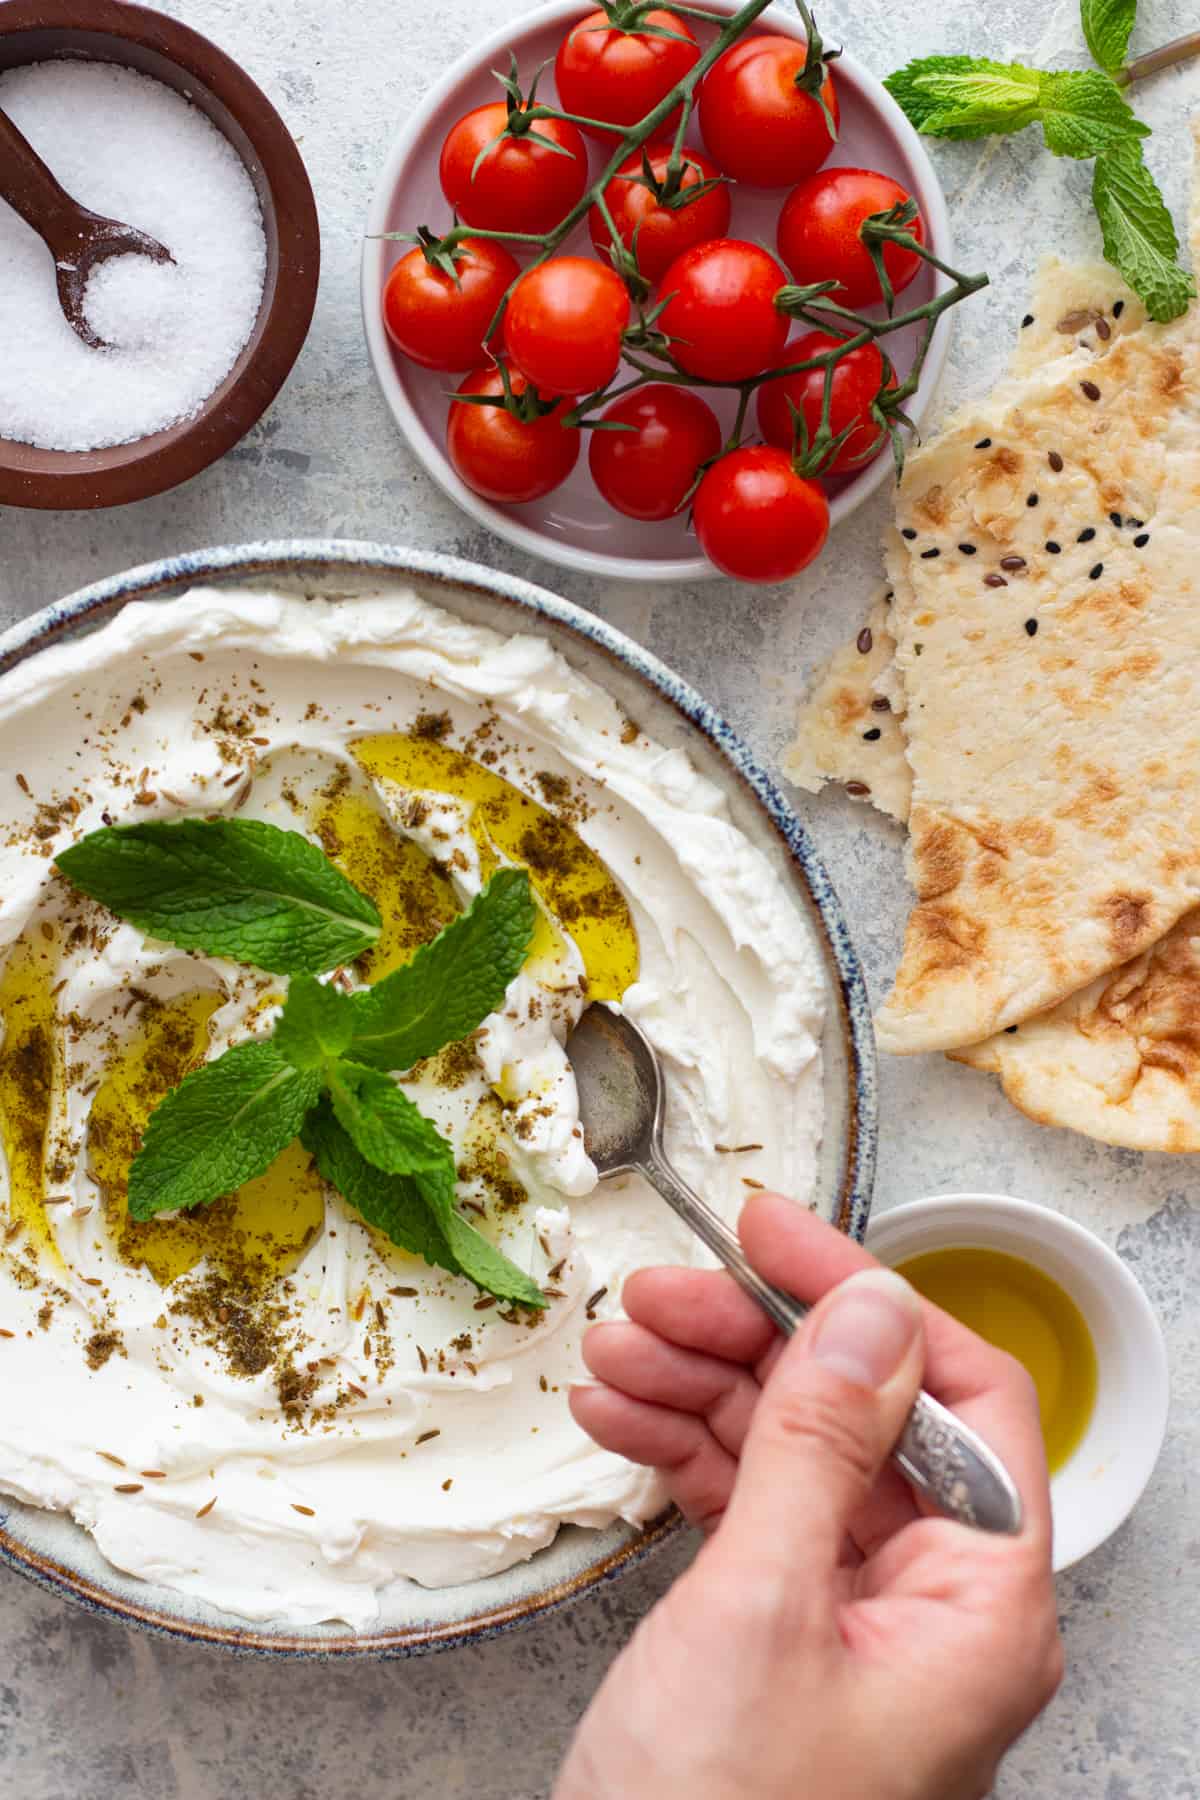 This recipe gives about two cups of labneh that you can keep in the fridge for up to a week.